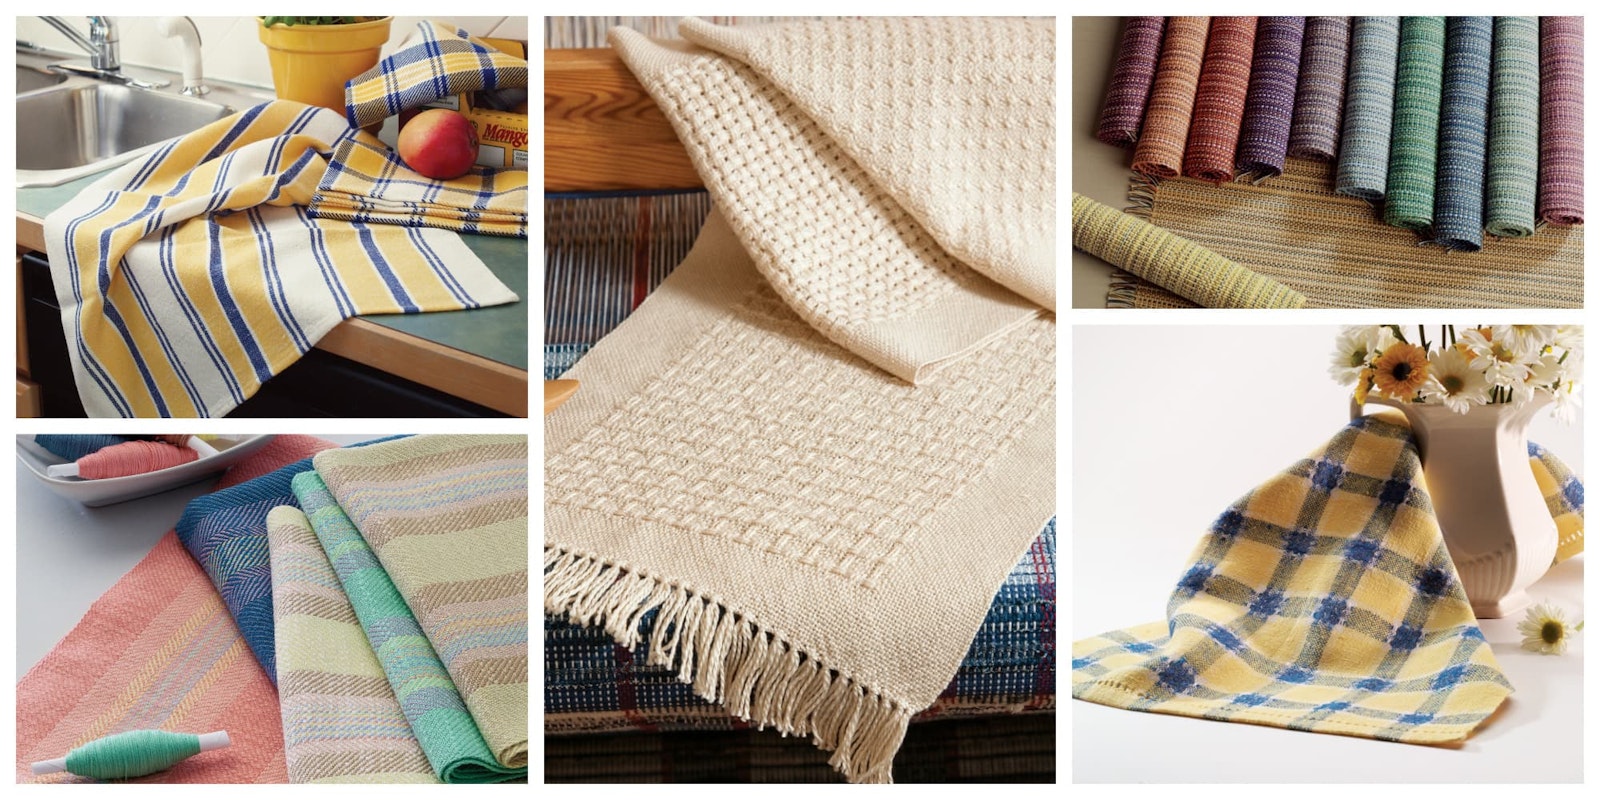 https://www.datocms-assets.com/75077/1661188323-5-weaving-projects-placemats-and-towels-beginners-1.jpg?w=1600&fm=jpg